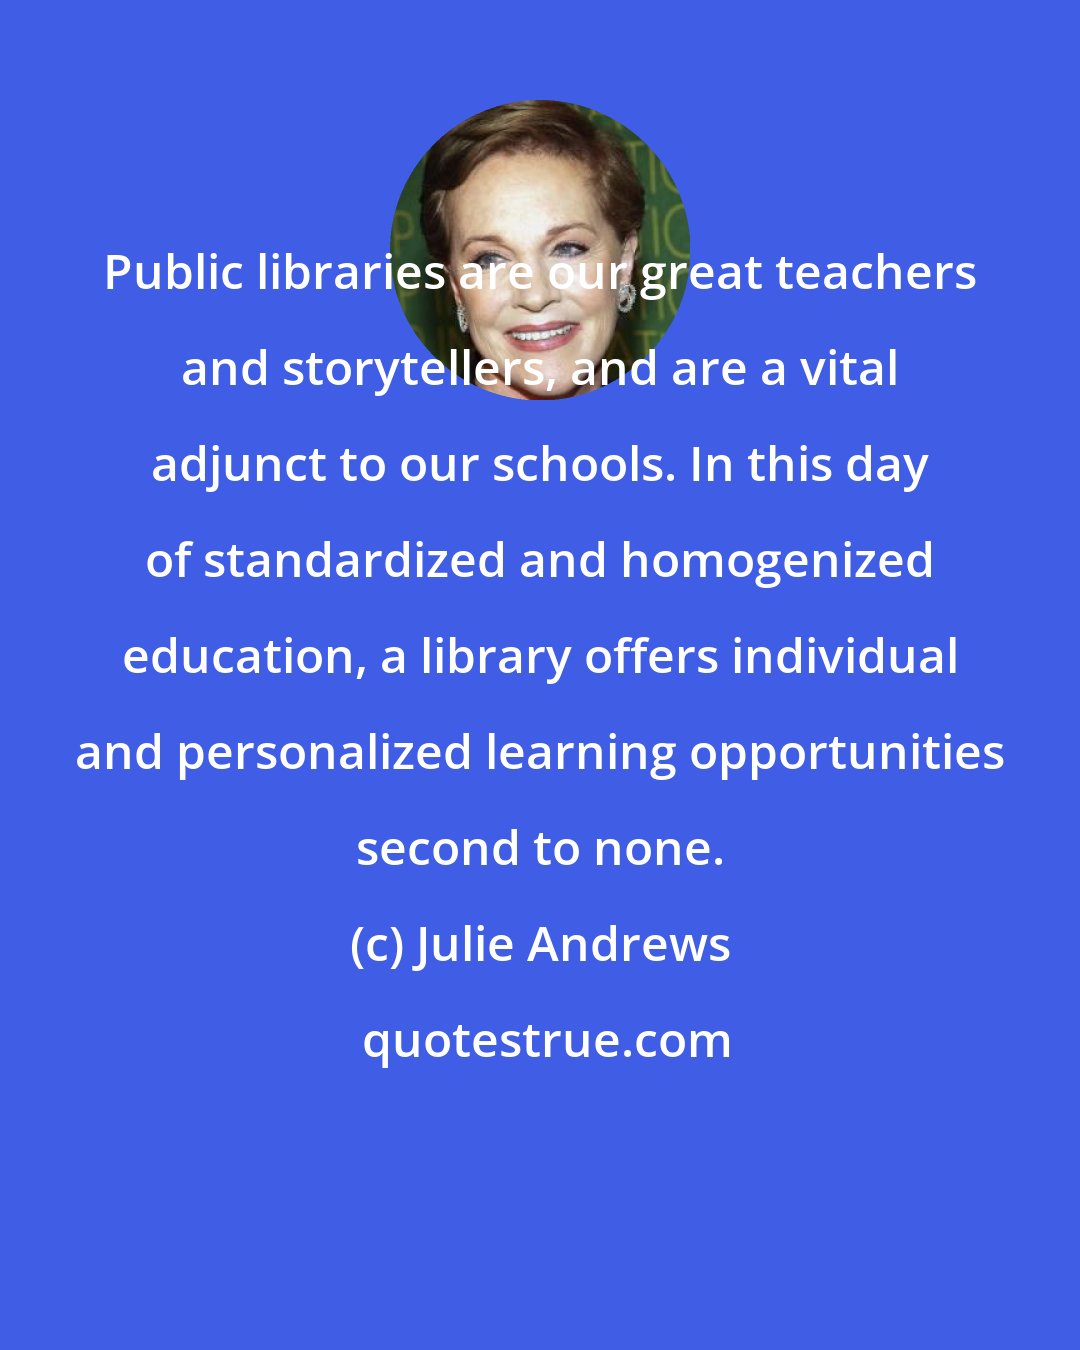 Julie Andrews: Public libraries are our great teachers and storytellers, and are a vital adjunct to our schools. In this day of standardized and homogenized education, a library offers individual and personalized learning opportunities second to none.